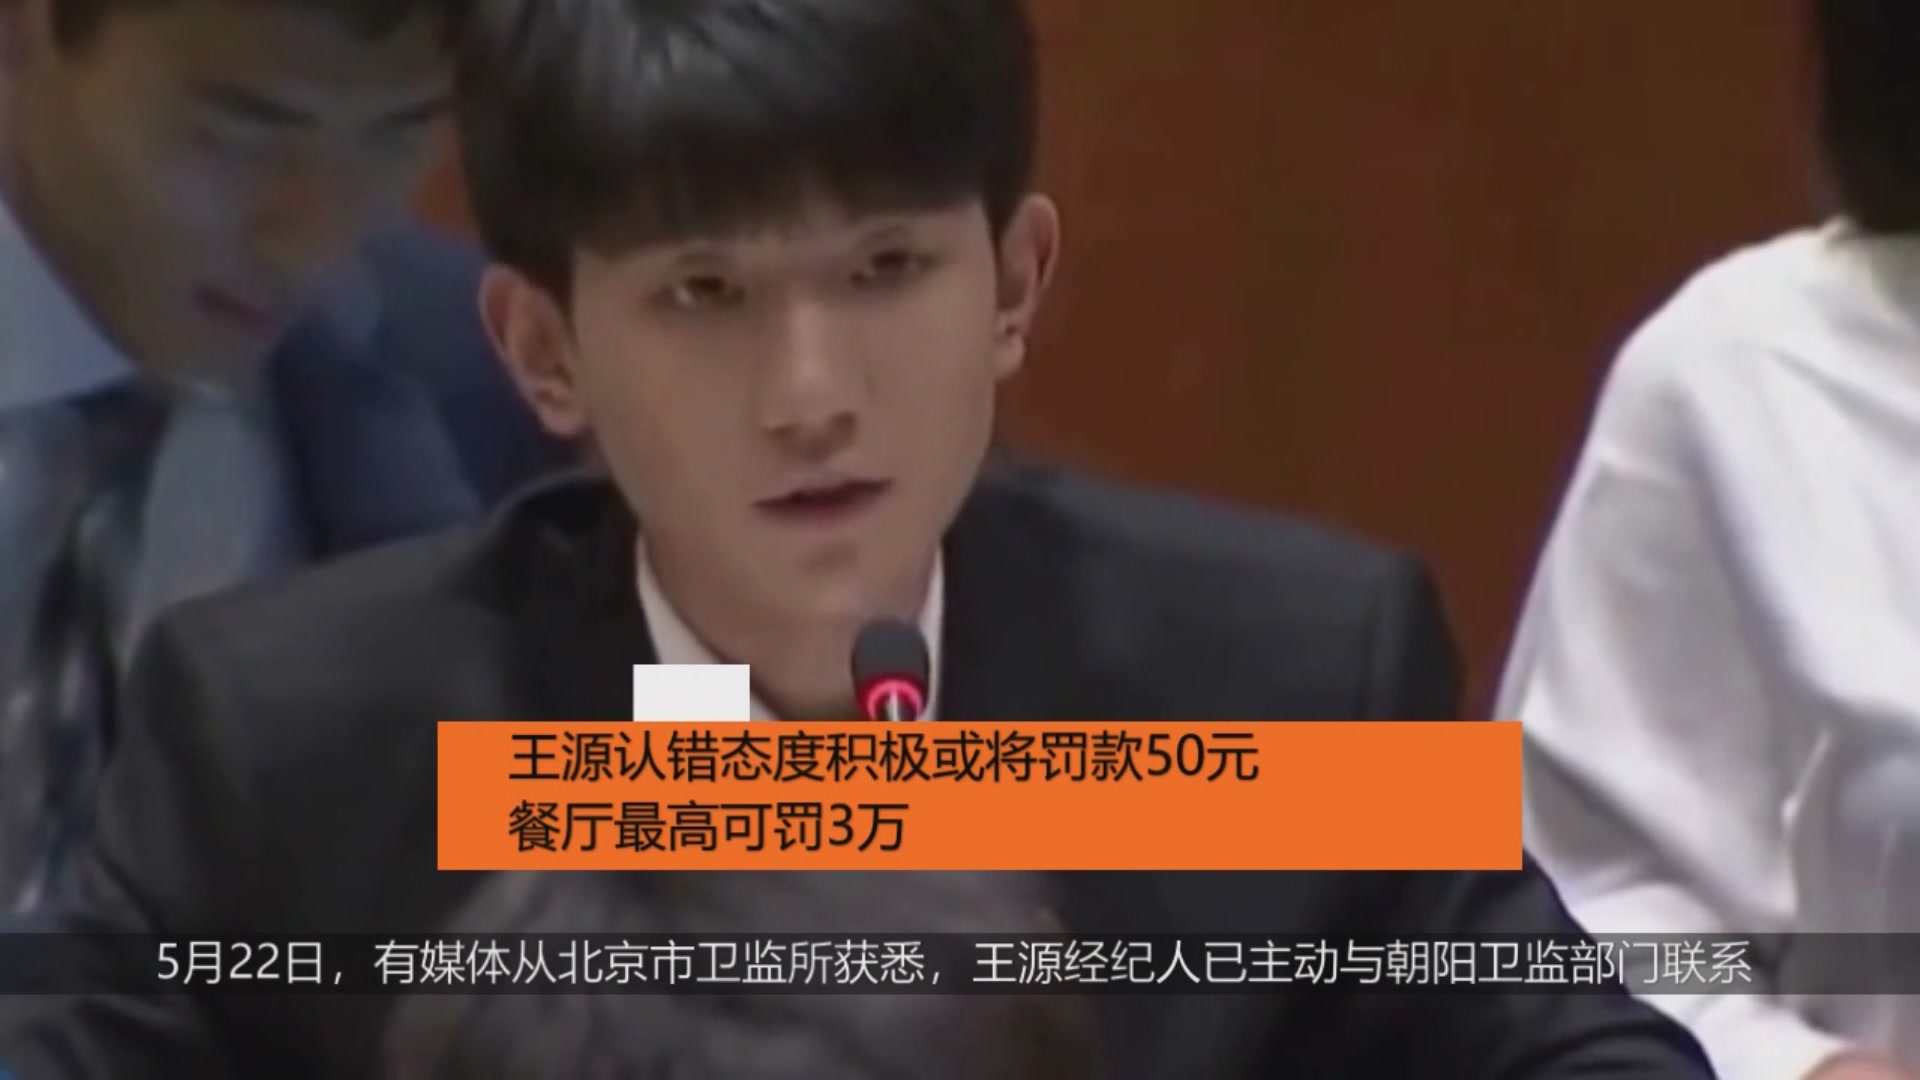 Wang Yuan has a positive attitude or will be fined 50 yuan. Restaurants can be fined up to 30,000 yuan.